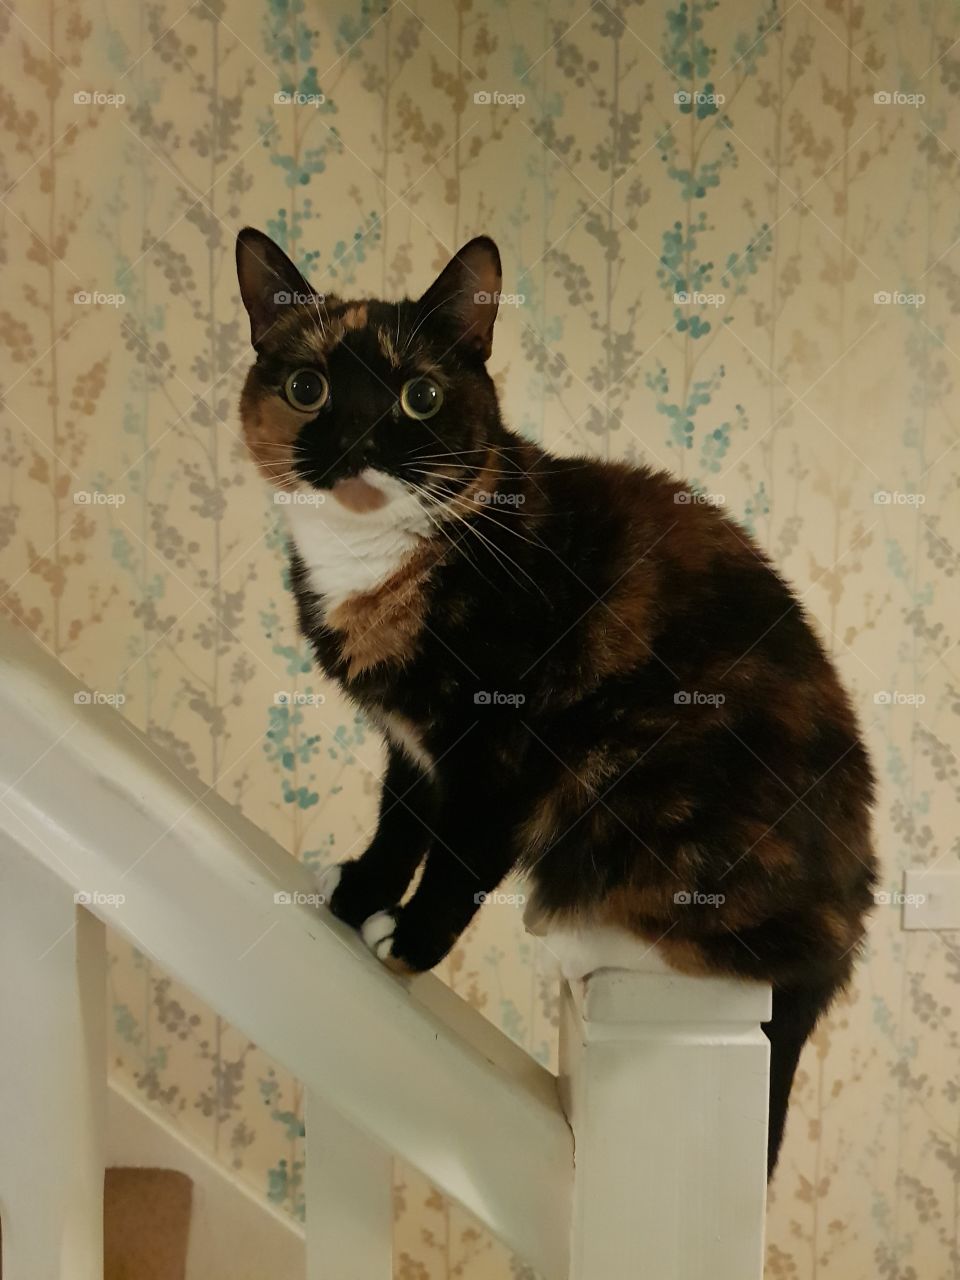 Balancing on the bannister (cat style)